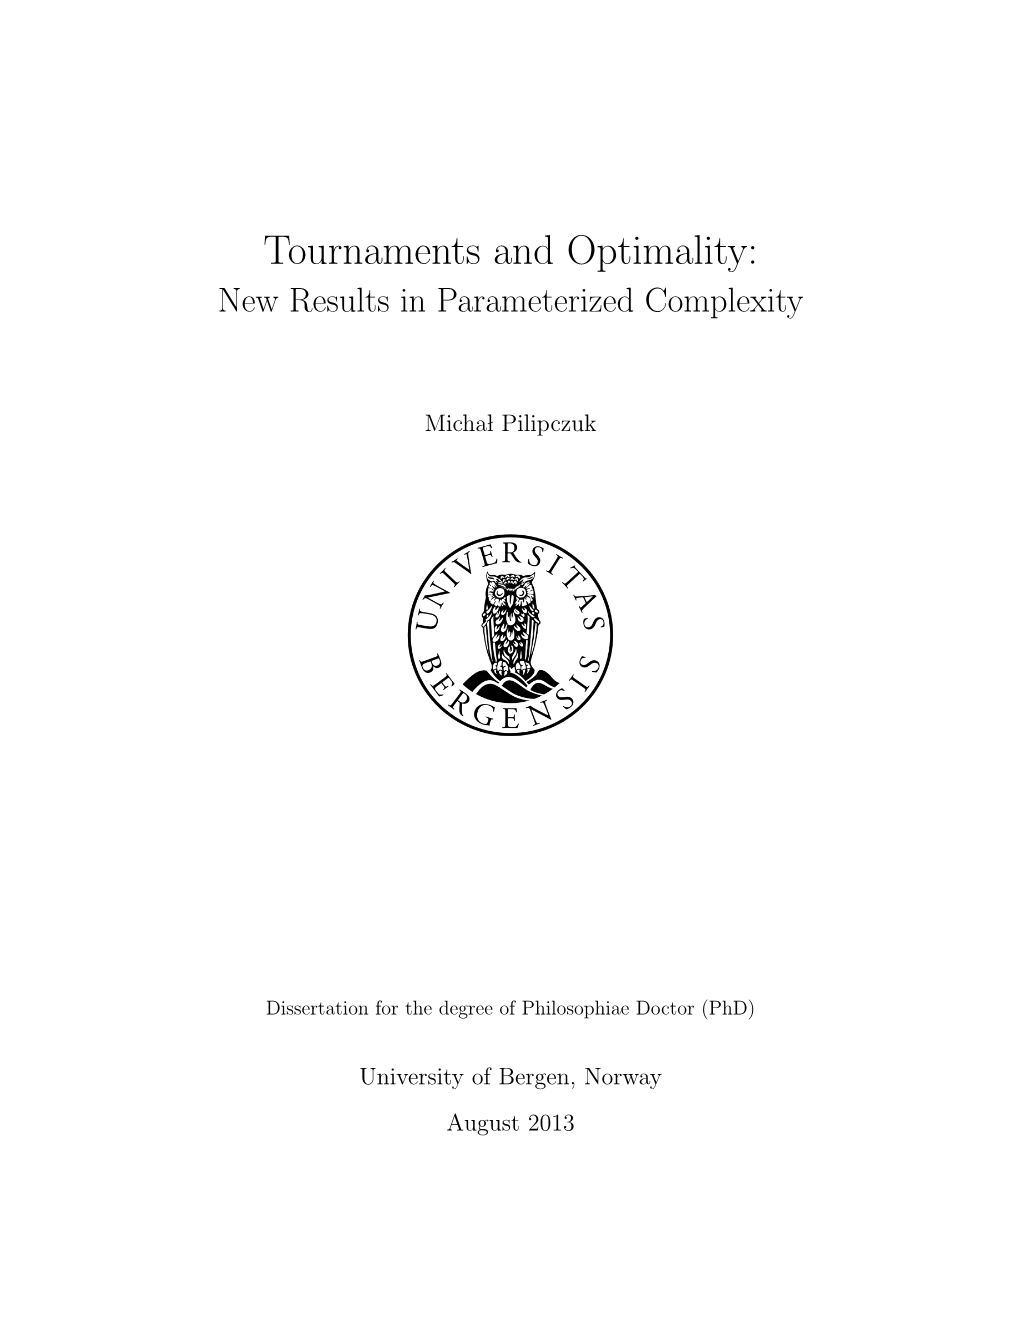 Tournaments and Optimality: New Results in Parameterized Complexity